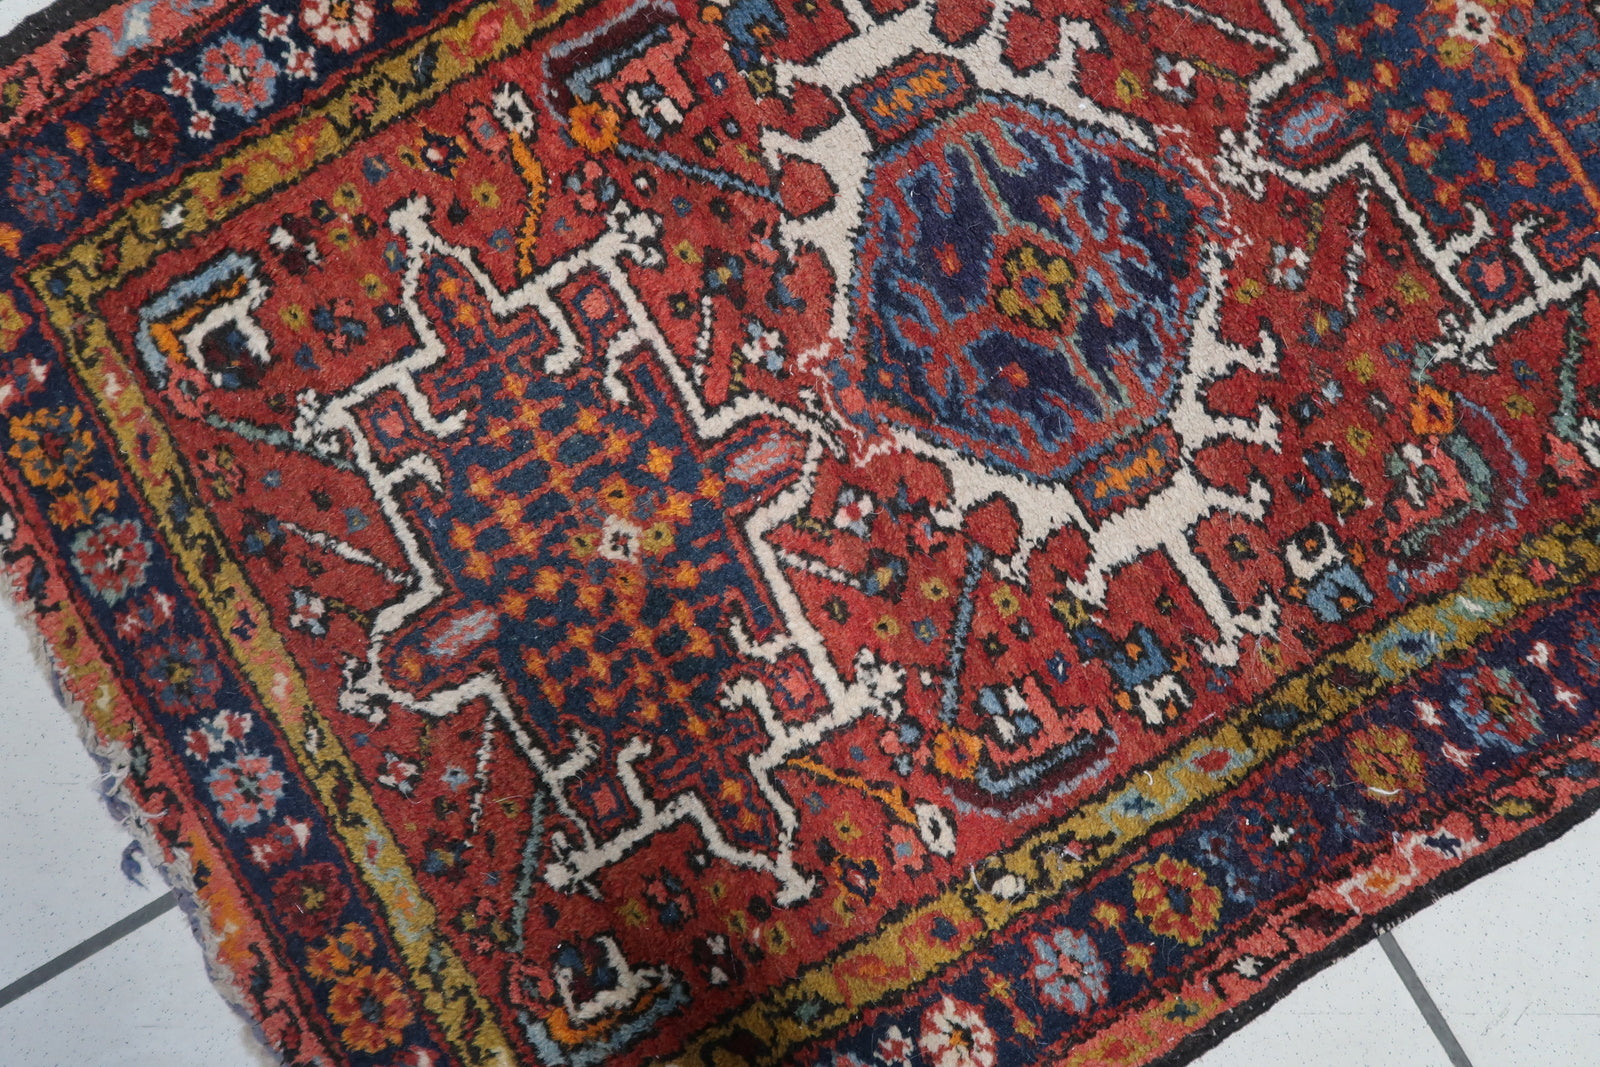 Close-up of the sky blue and navy blue colors on the Handmade Antique Persian Karajeh Rug